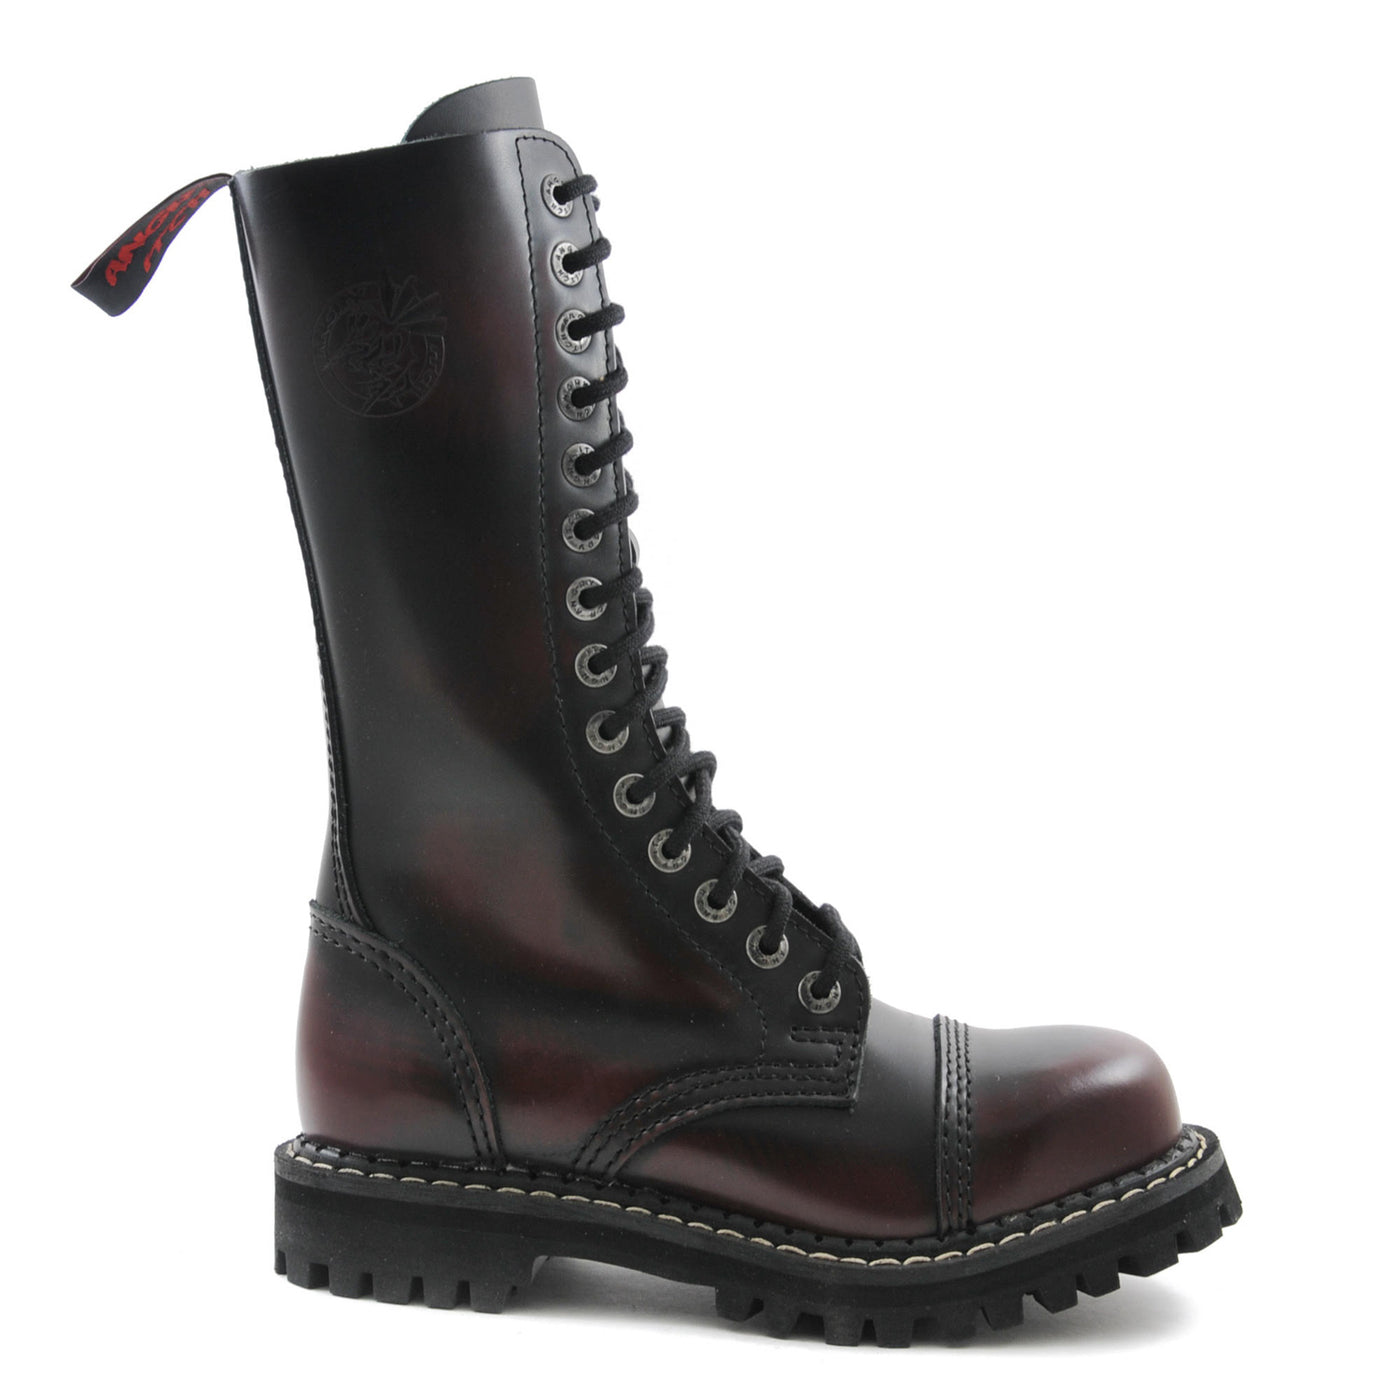 Angry Itch 14 Hole Combat Ranger Boots with Steel Toe Cap Burgundy Rub Off Leather